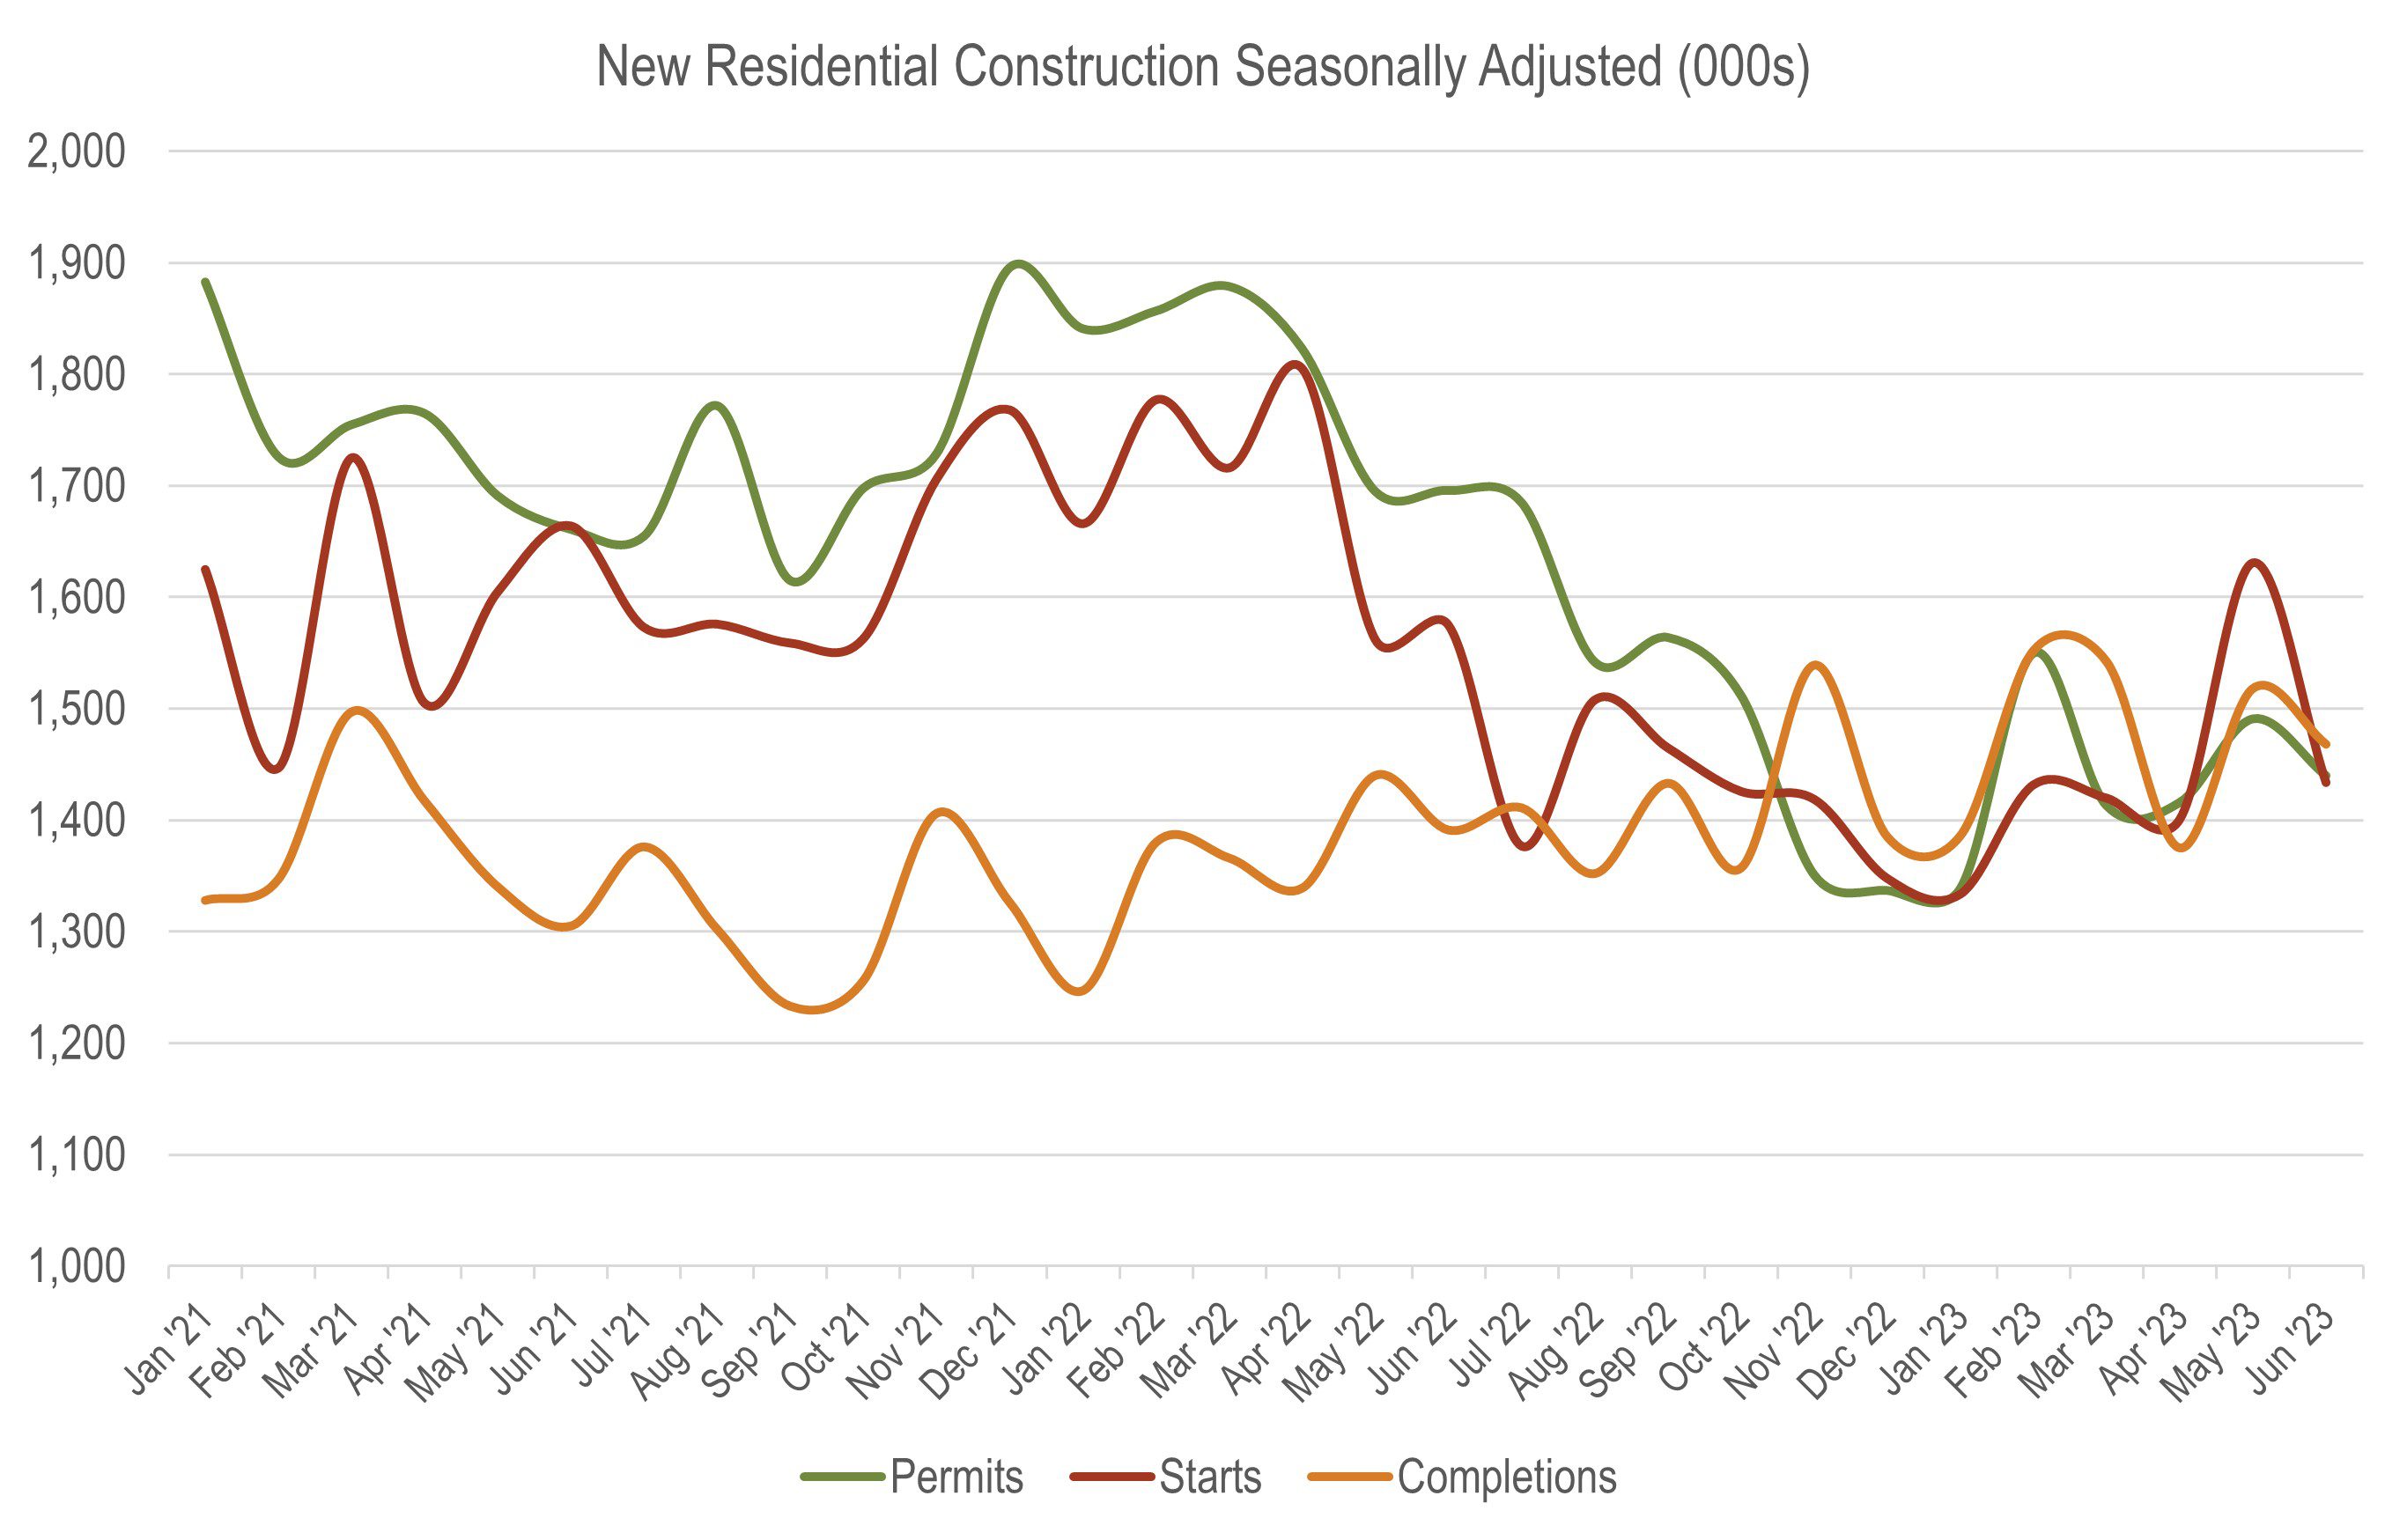 New Residential Construction Seasonally Adjusted Graph for Top 50 Top-Selling MPC's of Mid 2023